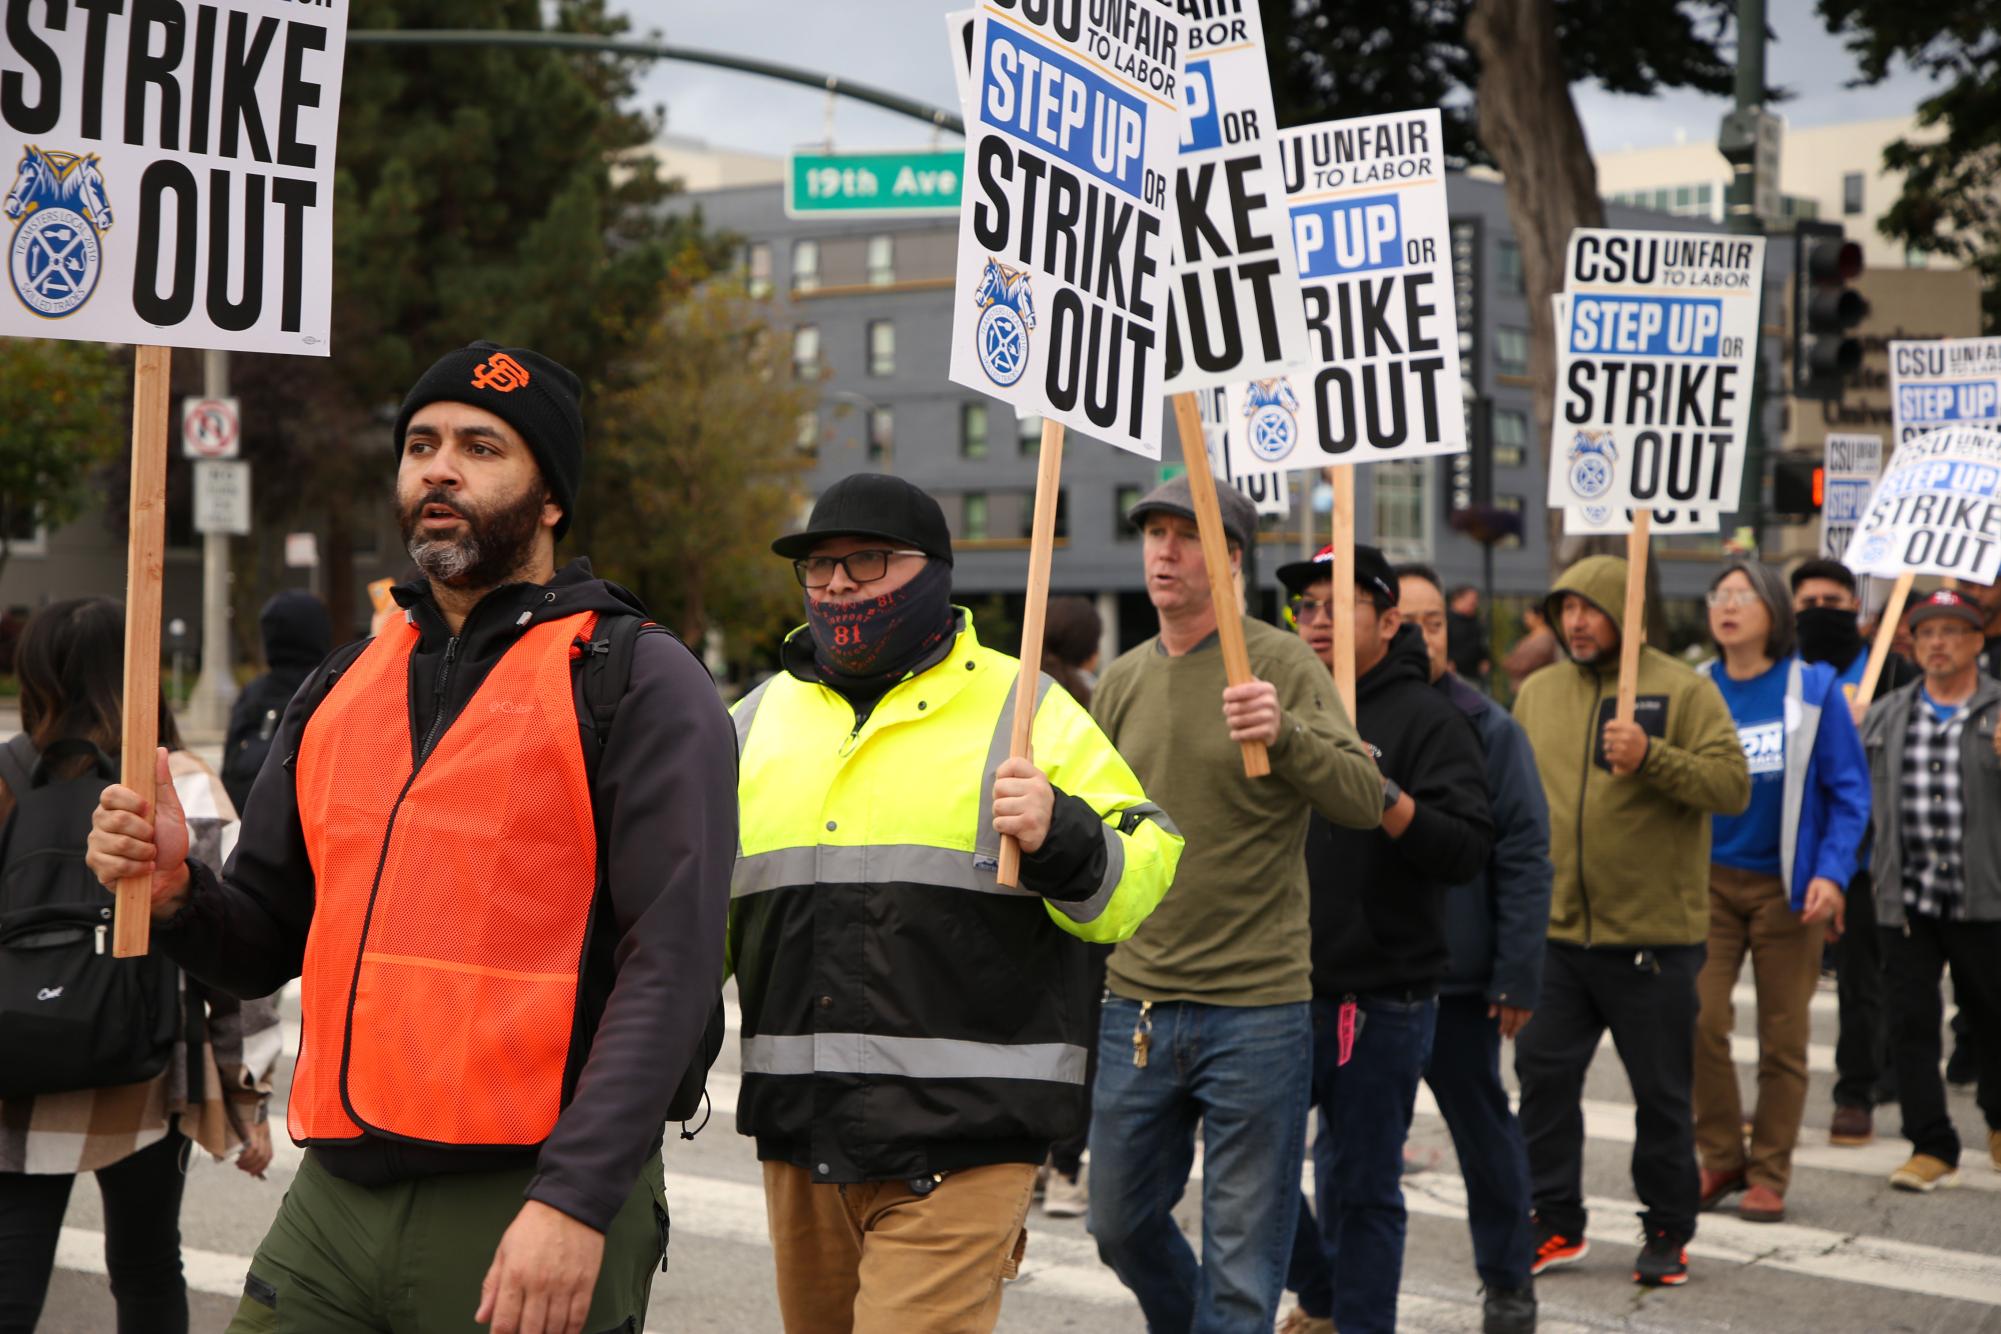 Teamsters 2010 Union goes on strike – Golden Gate Xpress